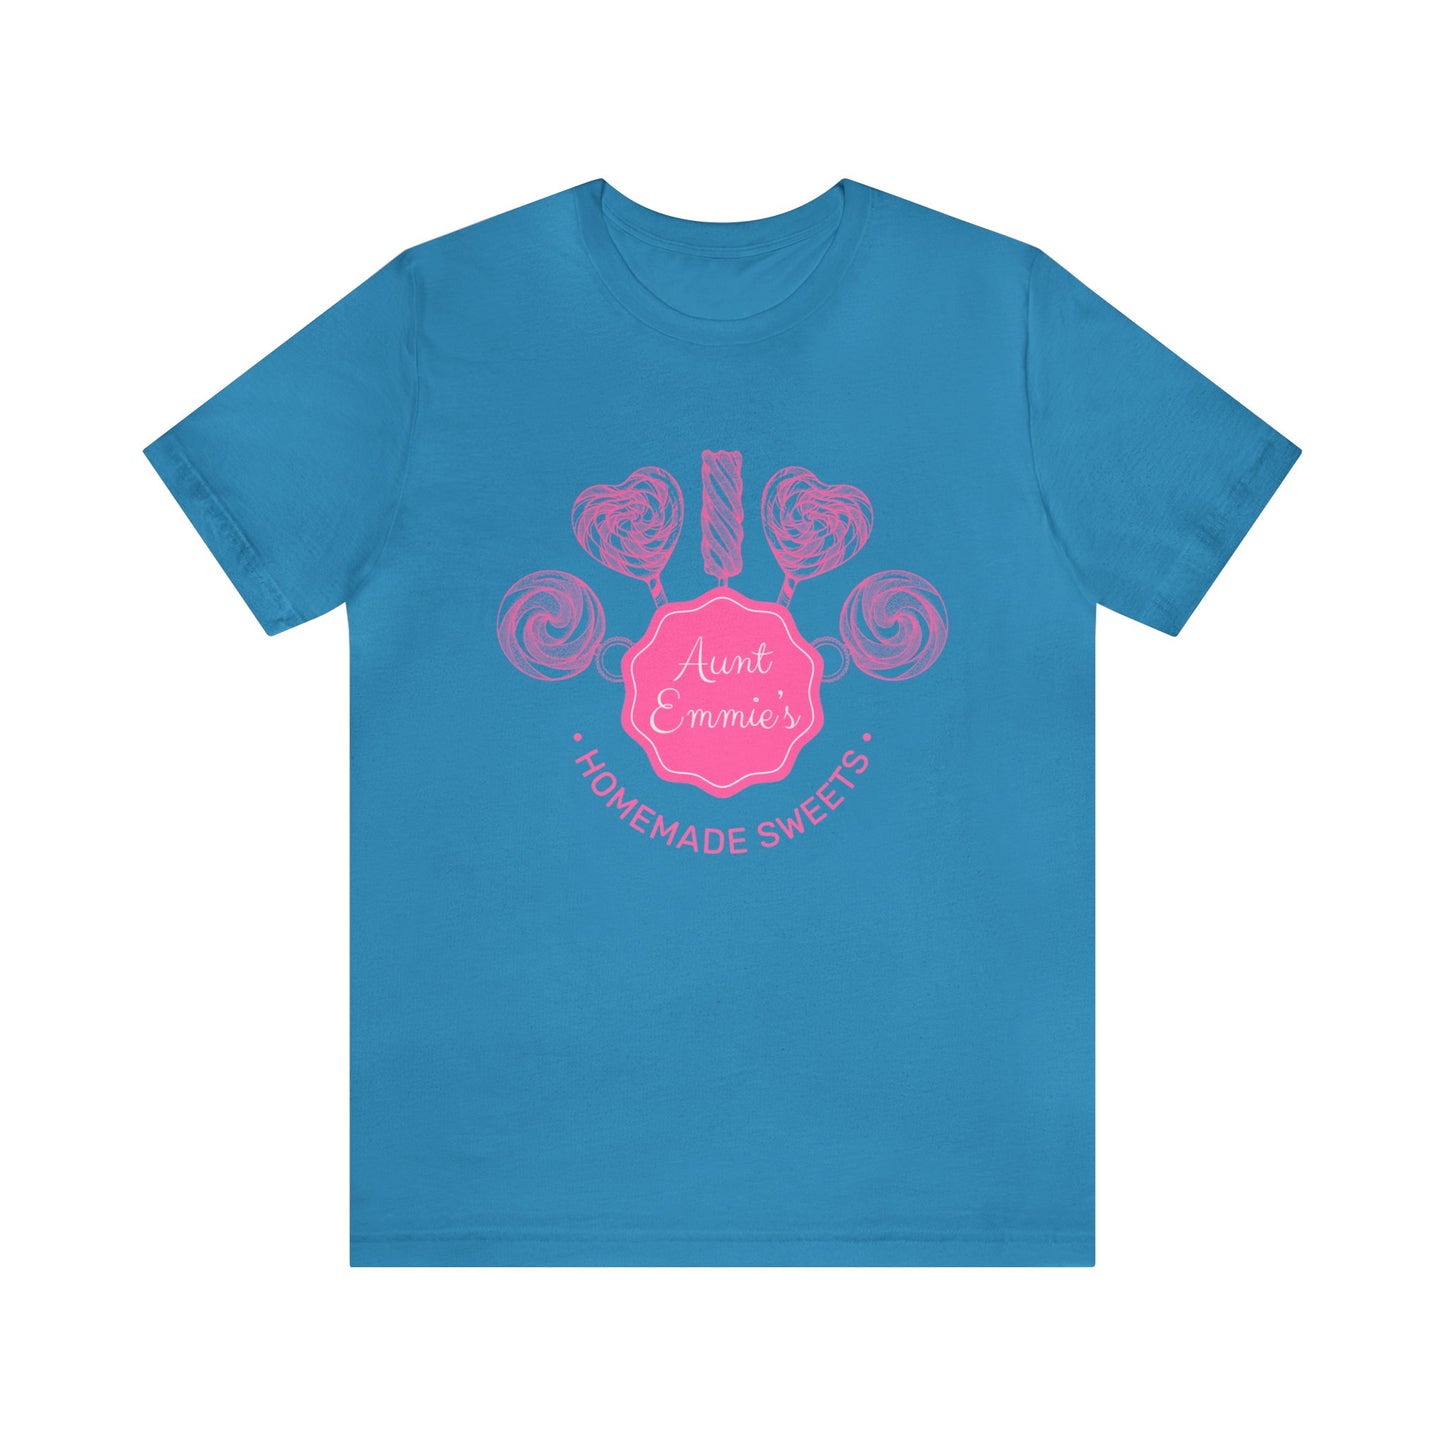 Aunt Emmie's Sweets, Jersey Short Sleeve Tee